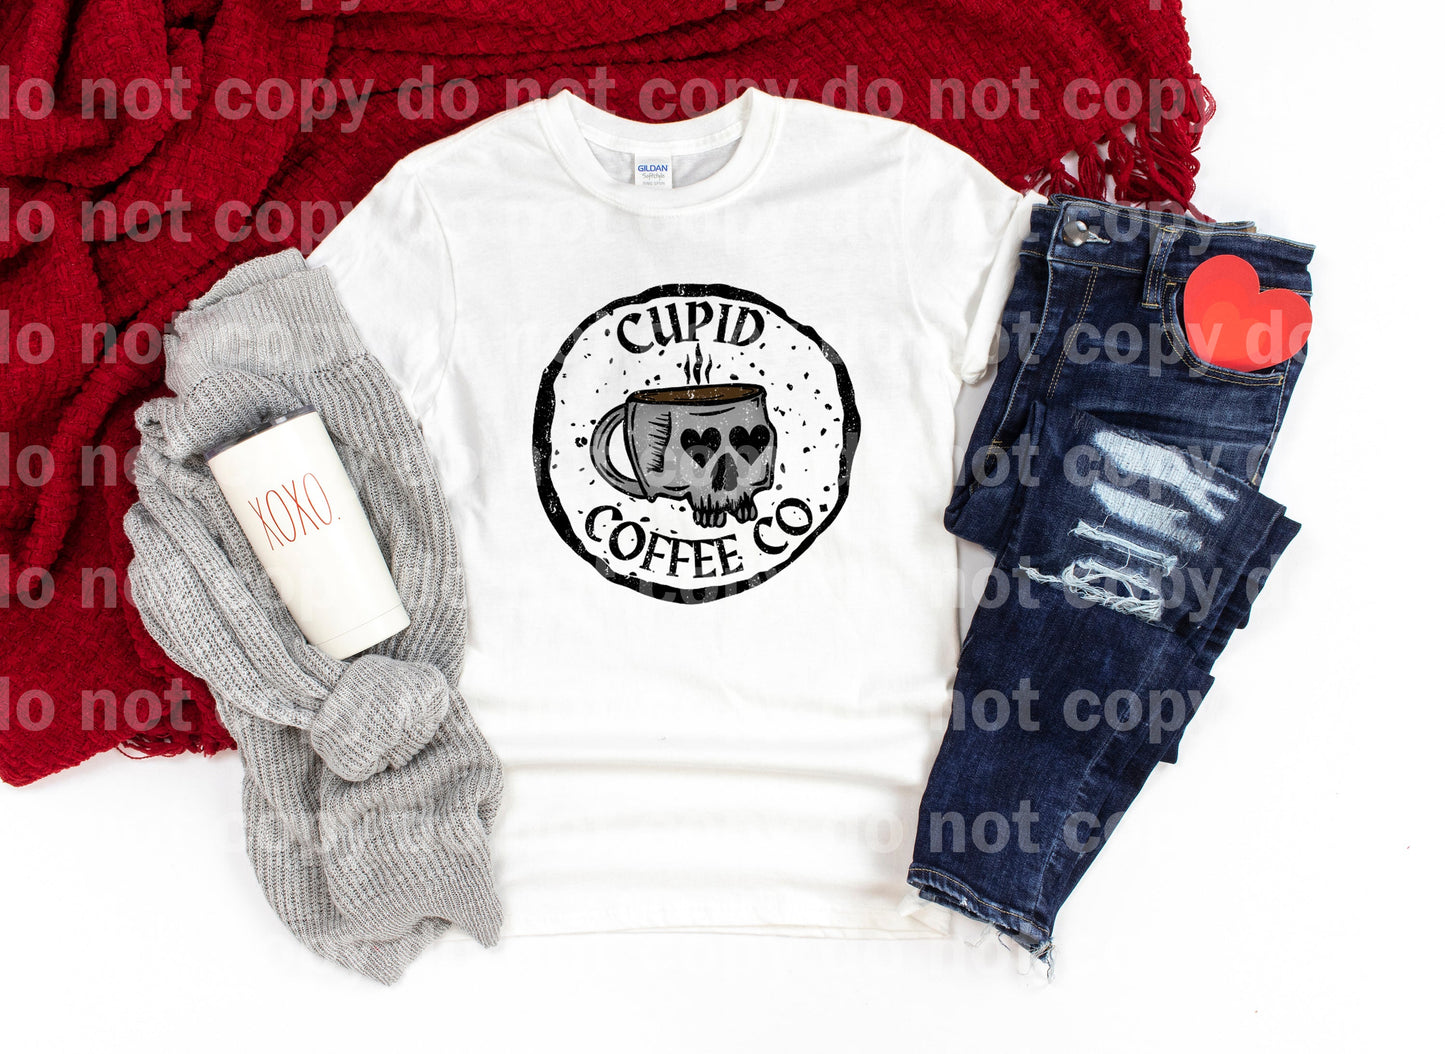 Cupid Coffee Co. Distressed Full Color/One Color Dream Print or Sublimation Print